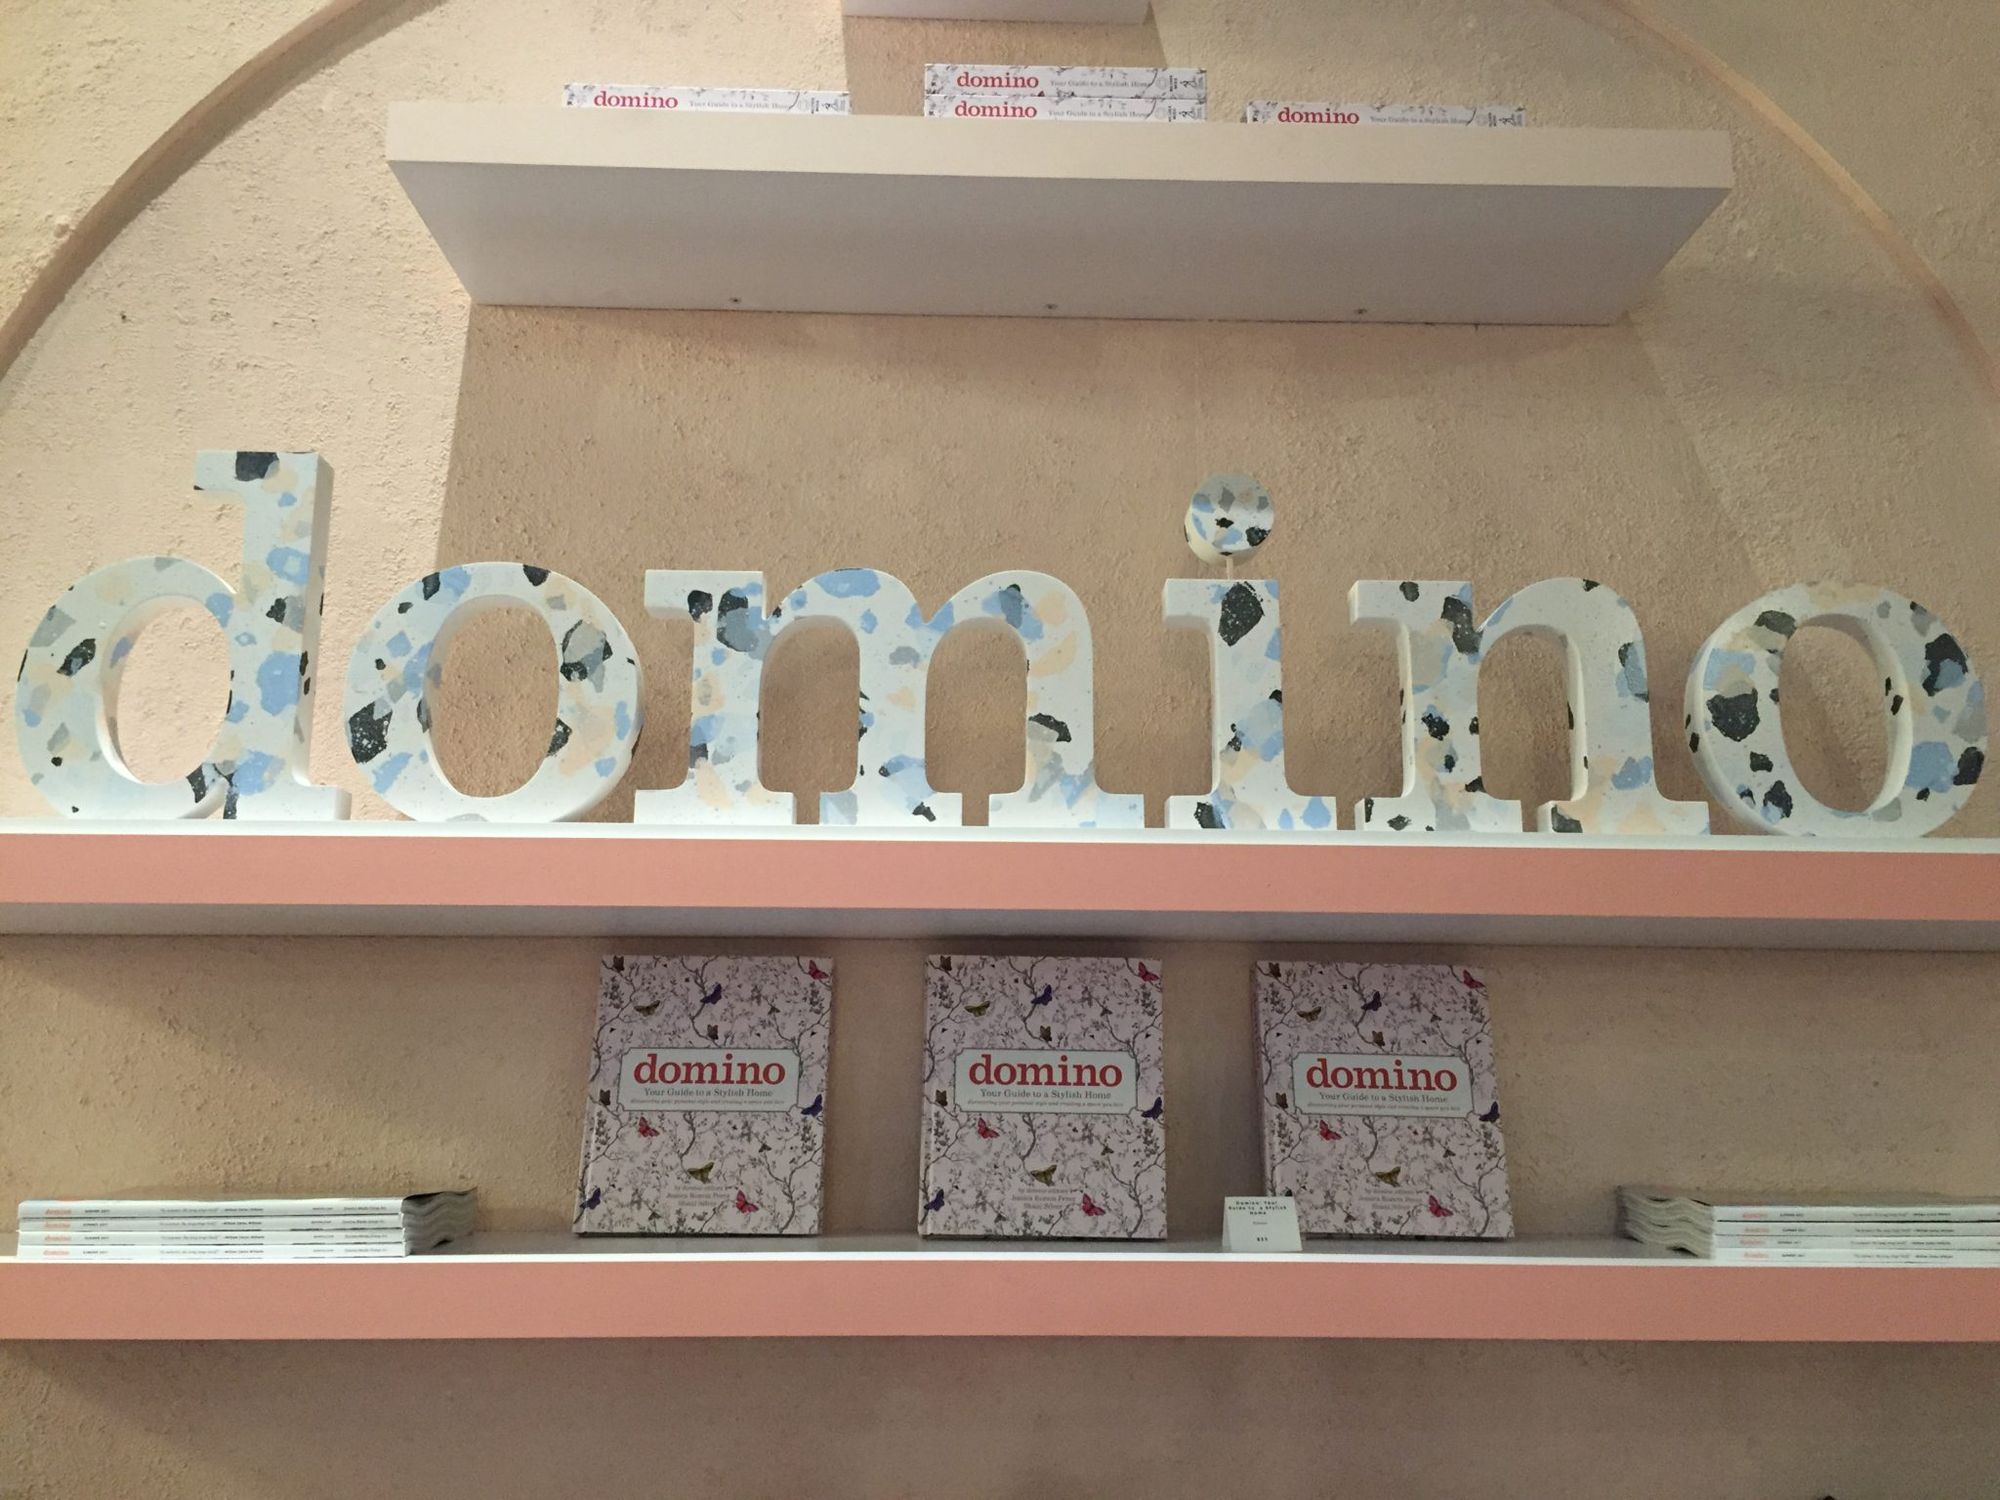 Domino Opens Summer Pop-Up Shop At City Point [Photos]